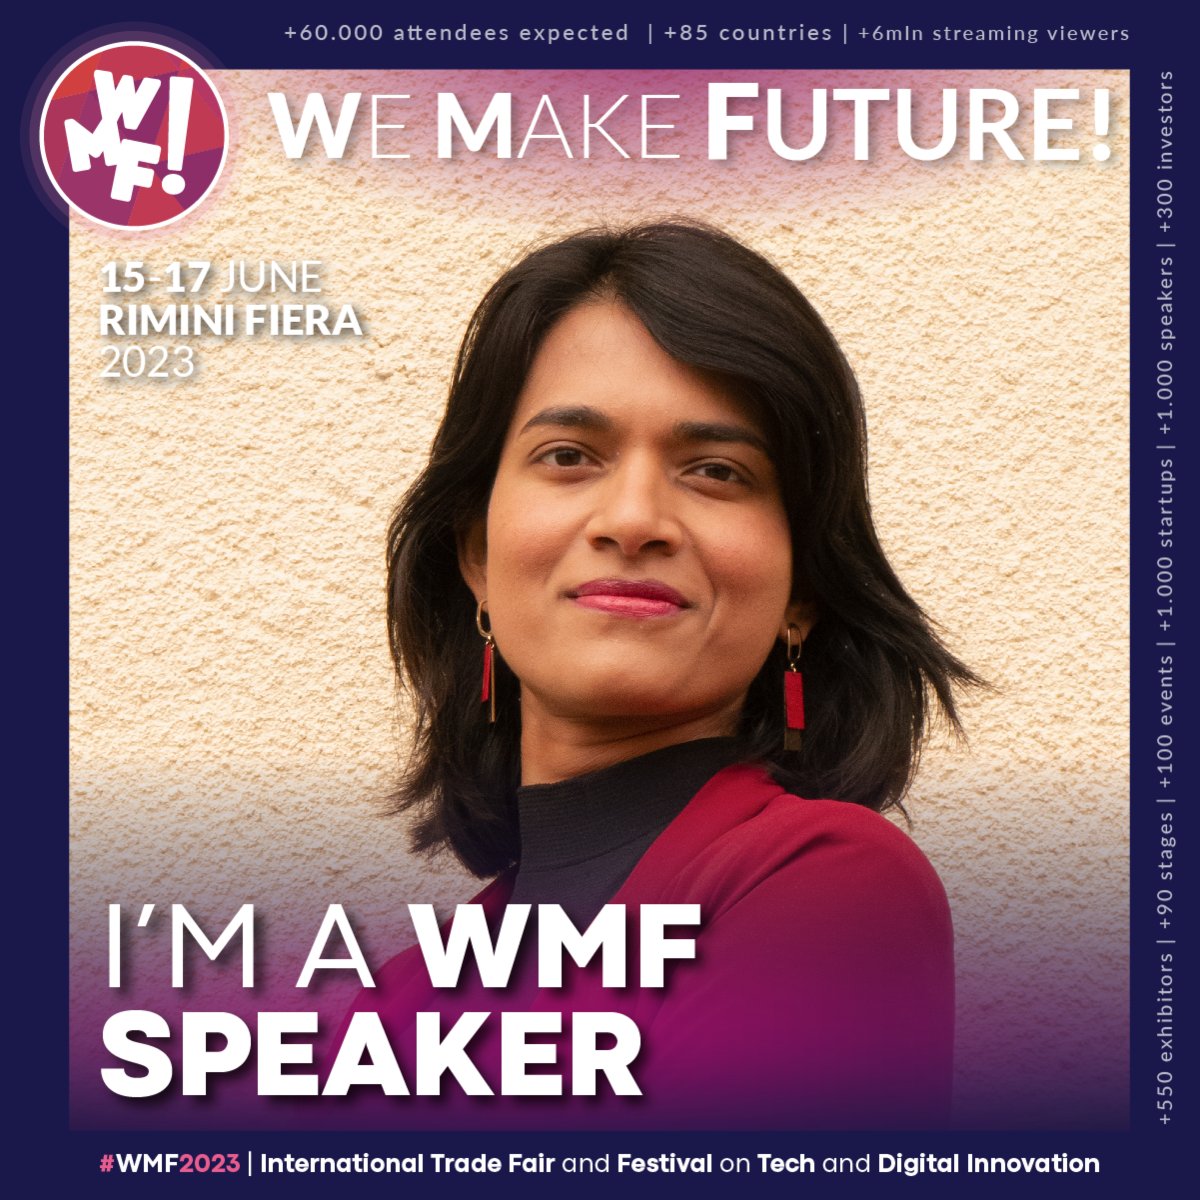 Our CEO @shalini_kr will be a speaker at @WMFWeMakeFuture! She will talk about the beneficial role of synthetic data for responsible innovation. If you'll be there, mark your calendars: 📅 15 June 2023 ⏰ 4.20pm 🌍 AI Marketing & Plenary stage, Rimini Fiera